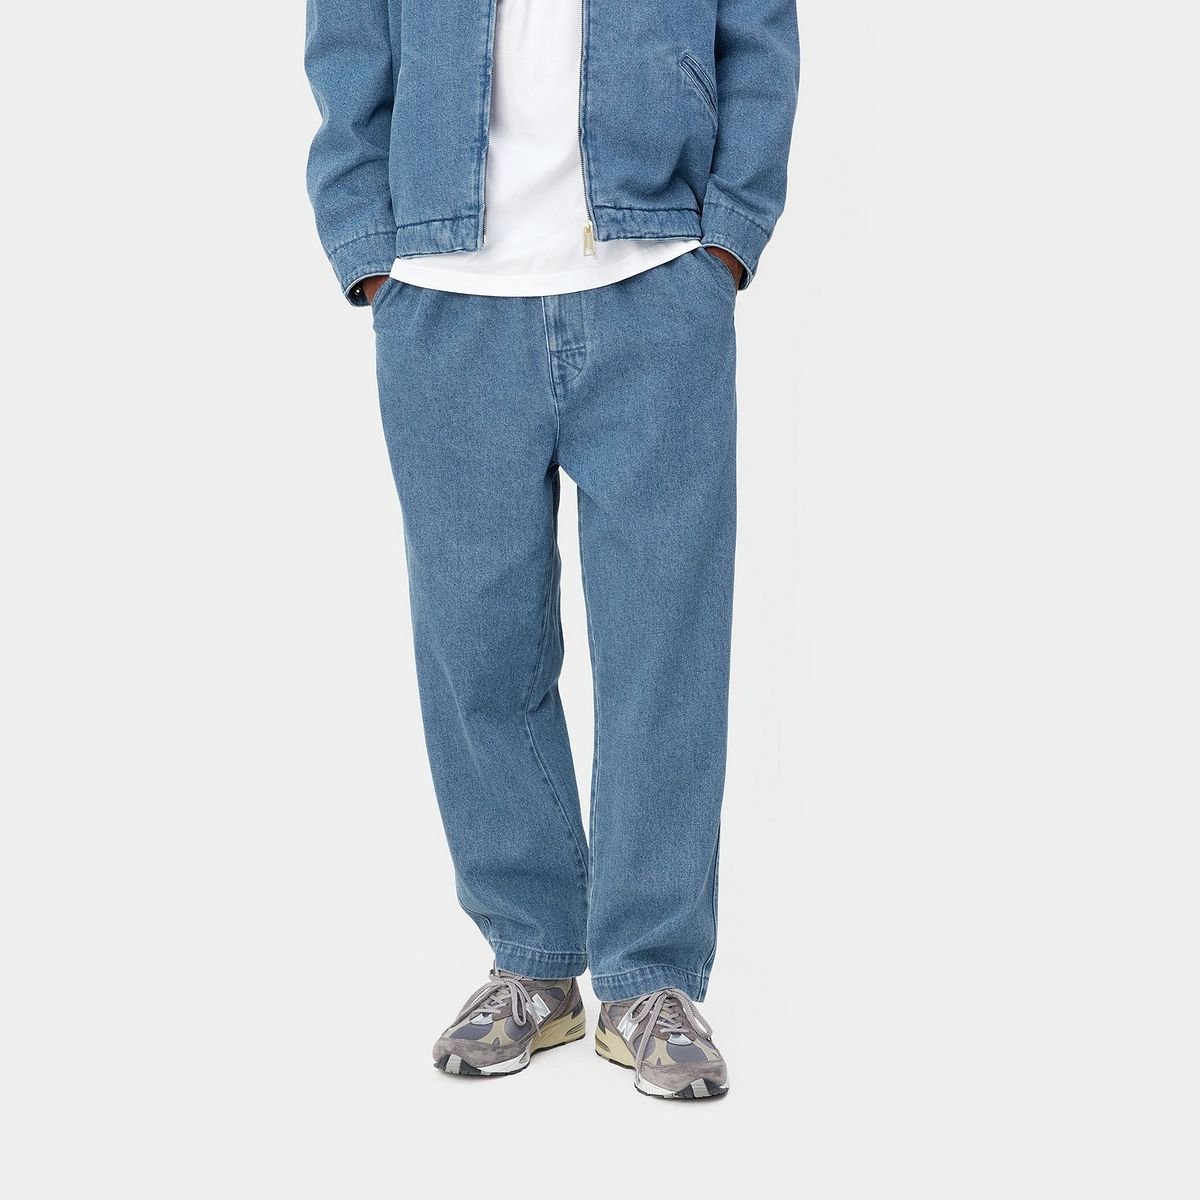 Jeans Carhartt WIP Garren Pant Blue Stone Washed A232027_01_06